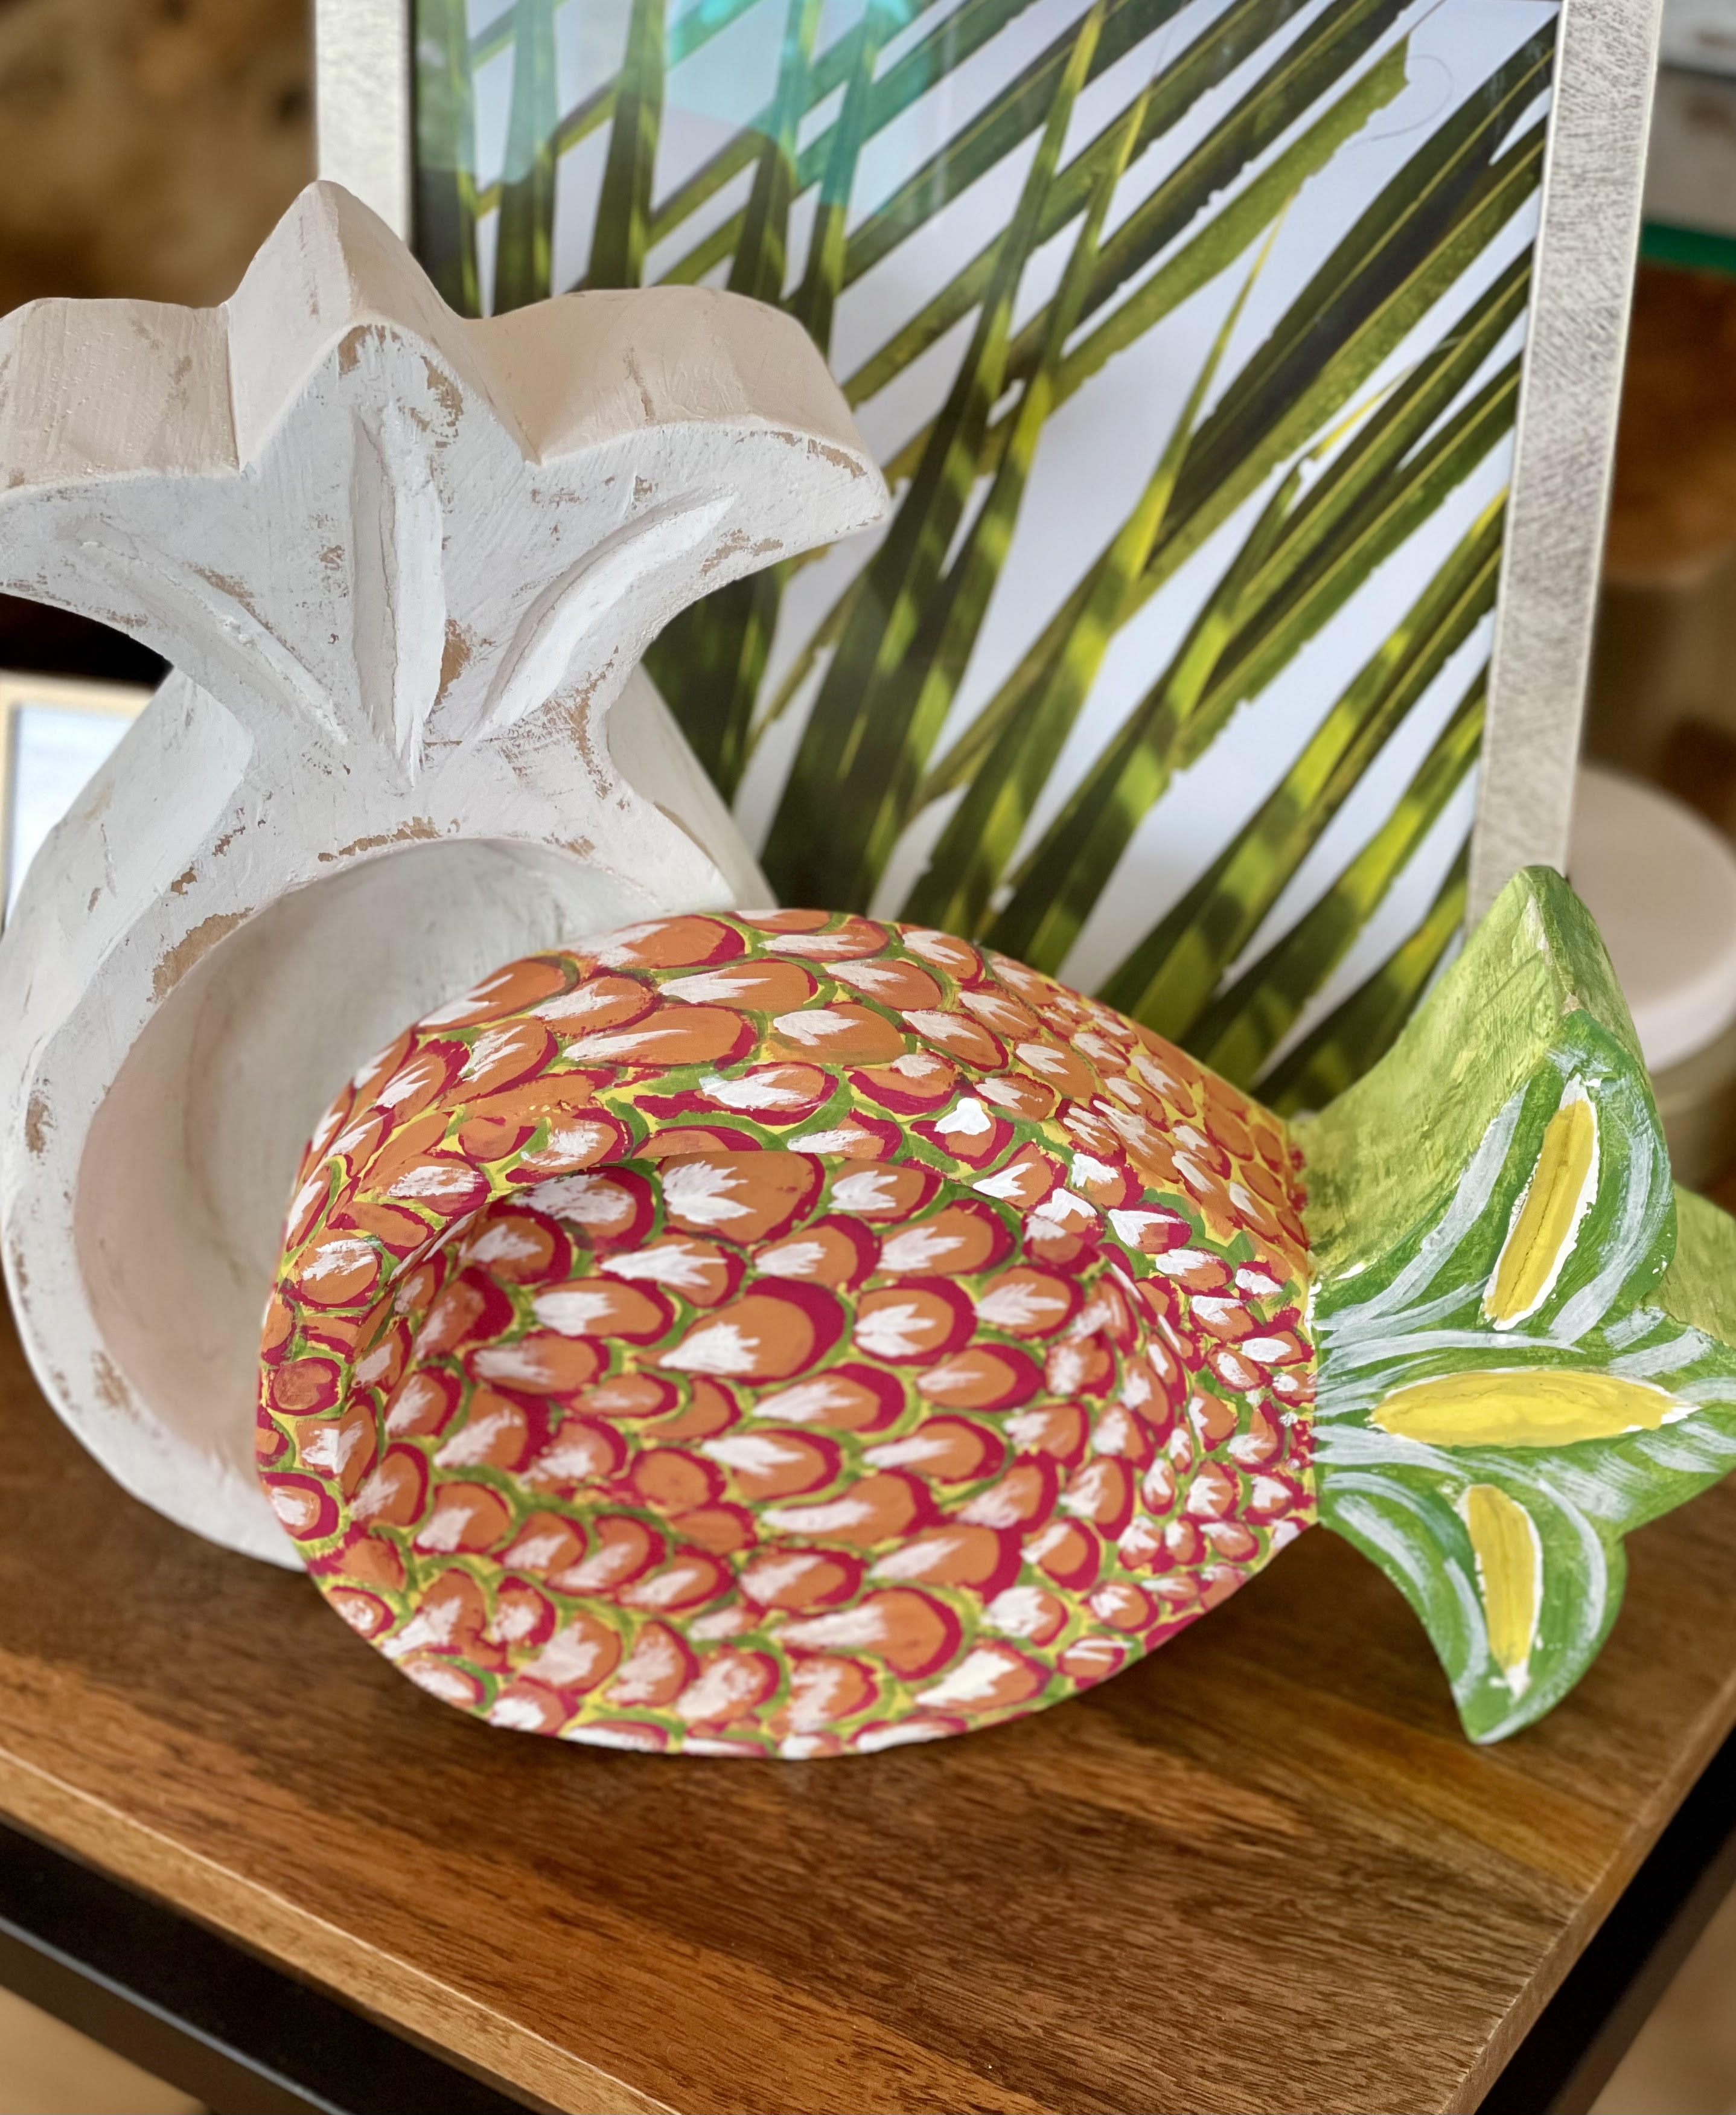 Paint Your Own Pineapple Dough Bowl Class - May 18th from 11:00-2:00